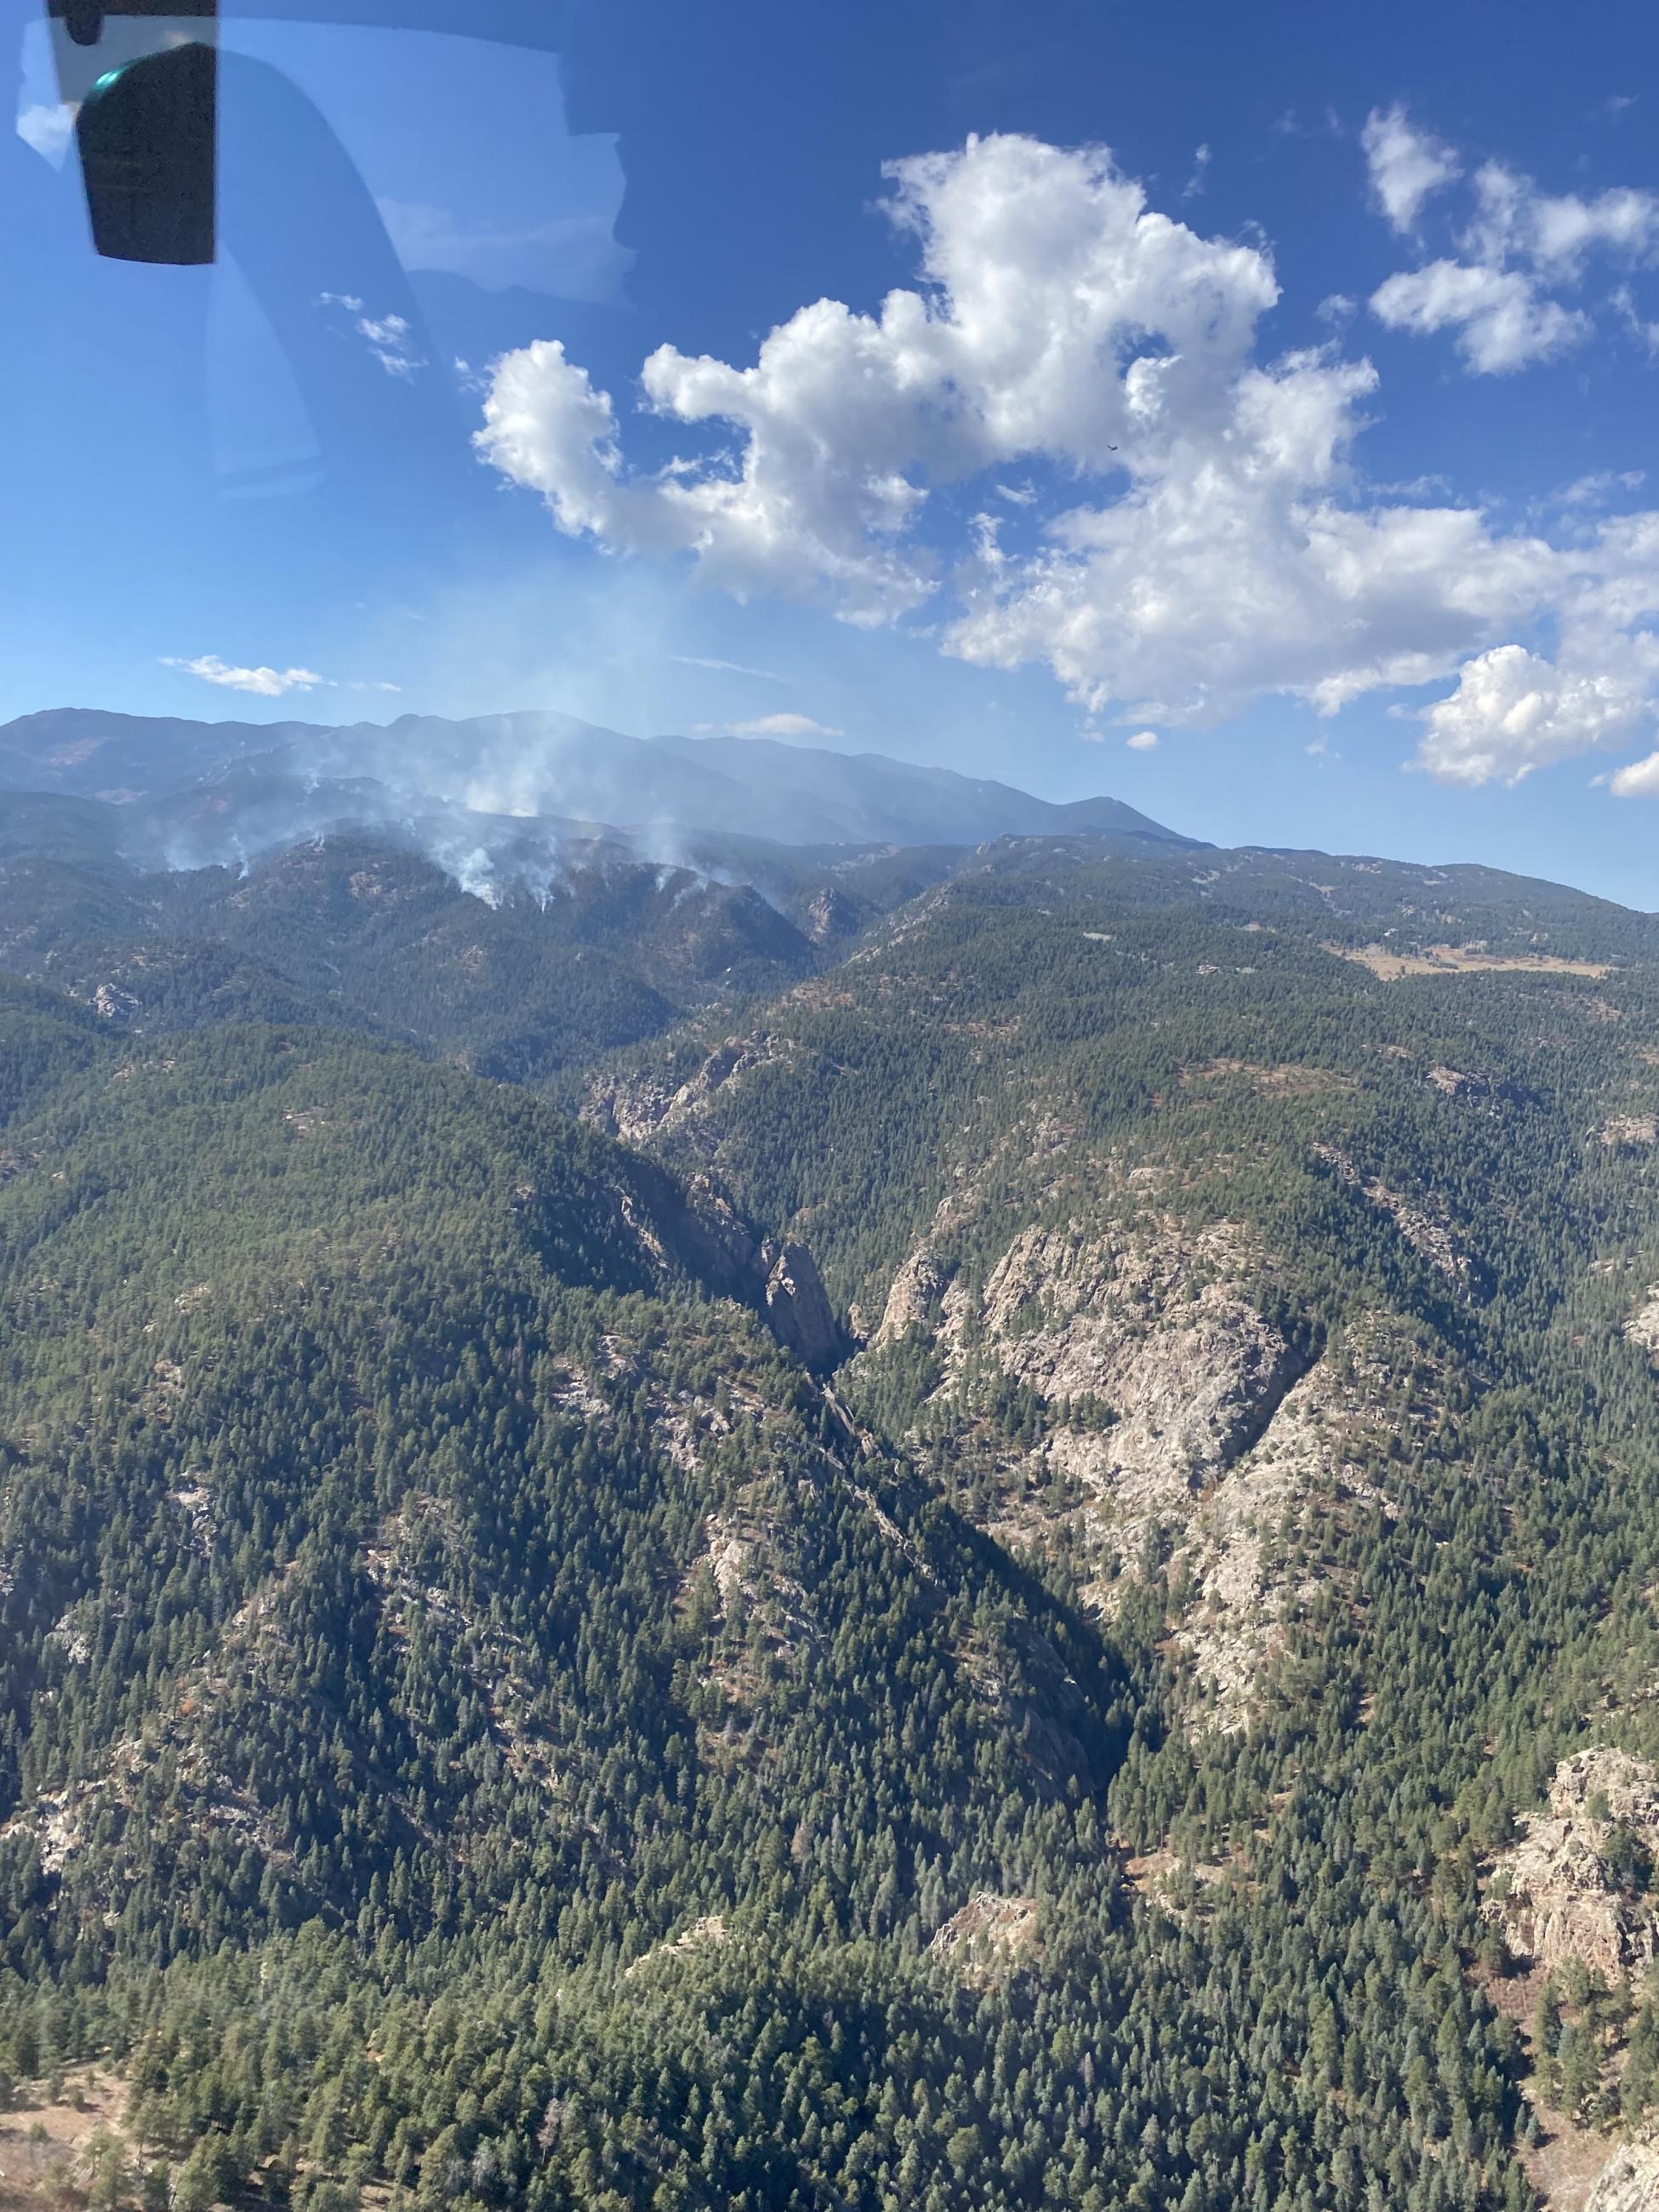 Smoke in the mountain, deep canyon. View from helicopter.